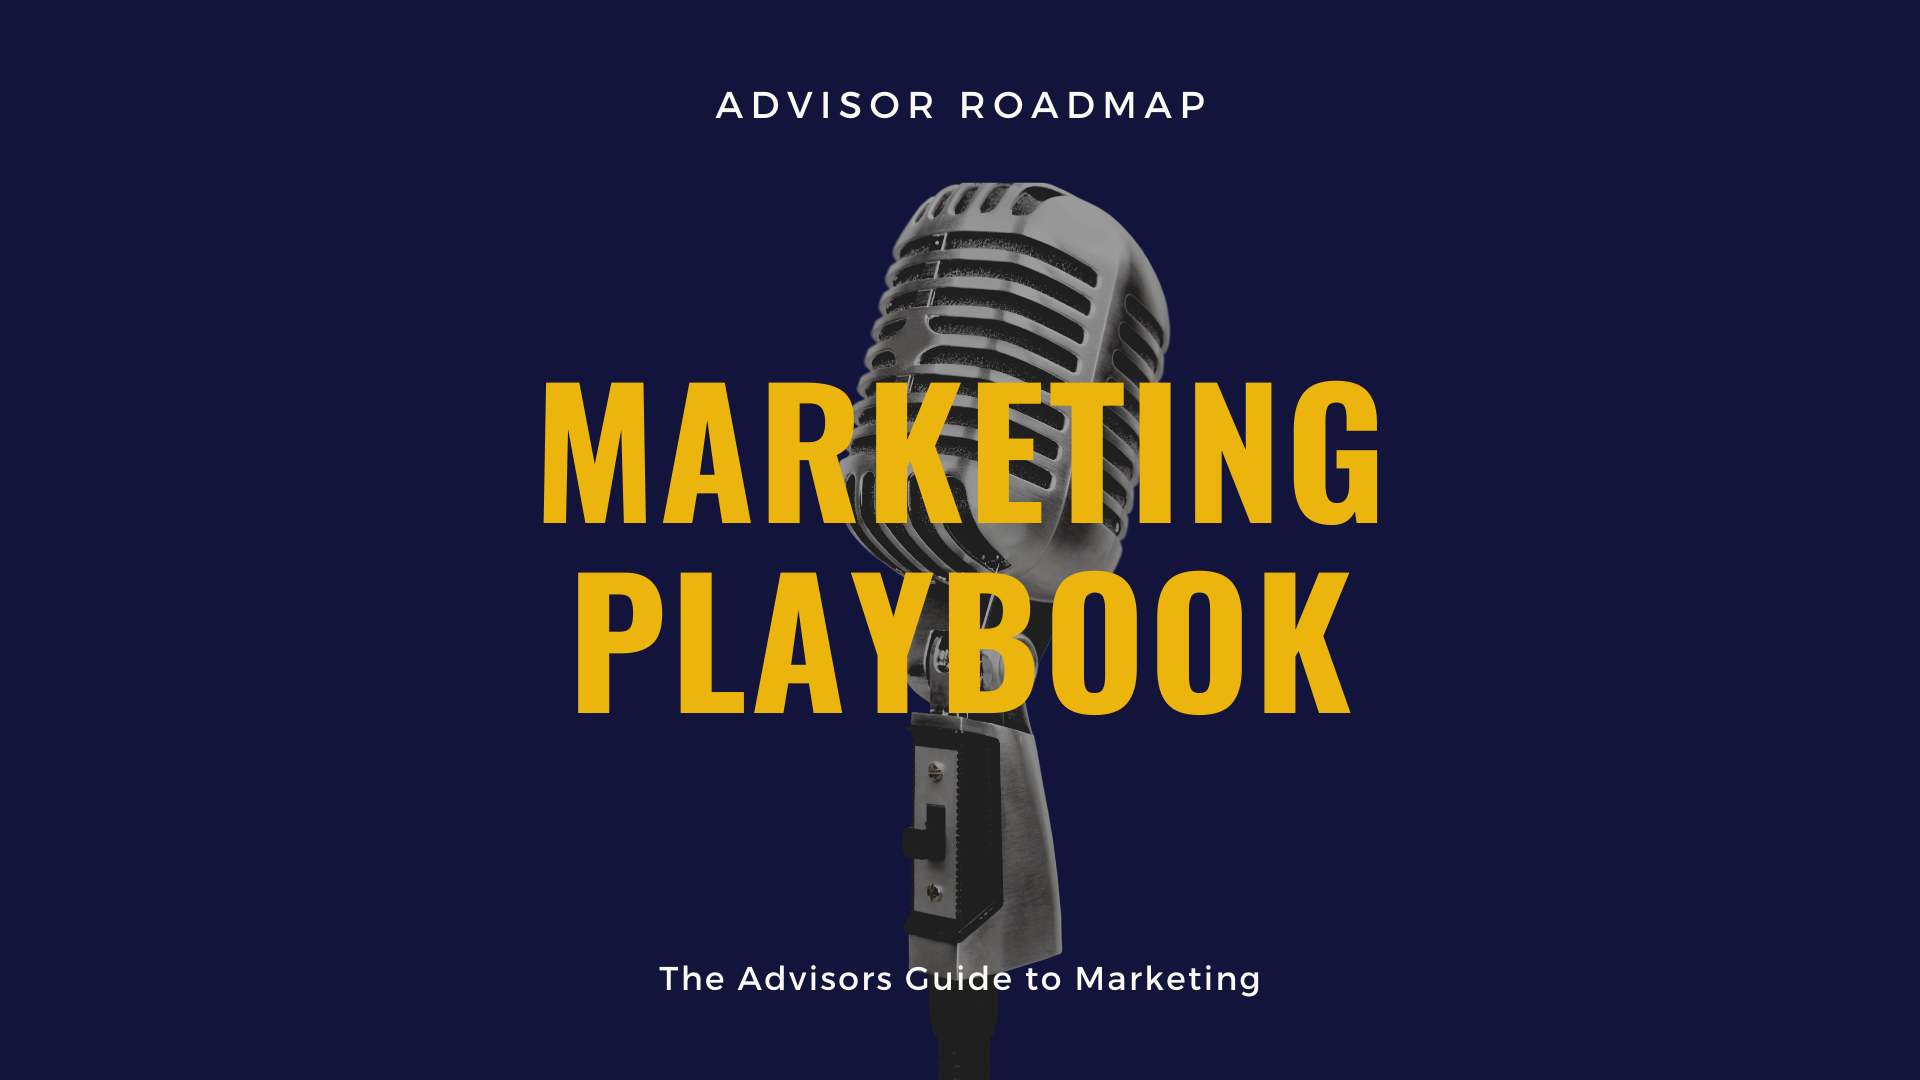 Download our complete Advisor Marketing Playbook above